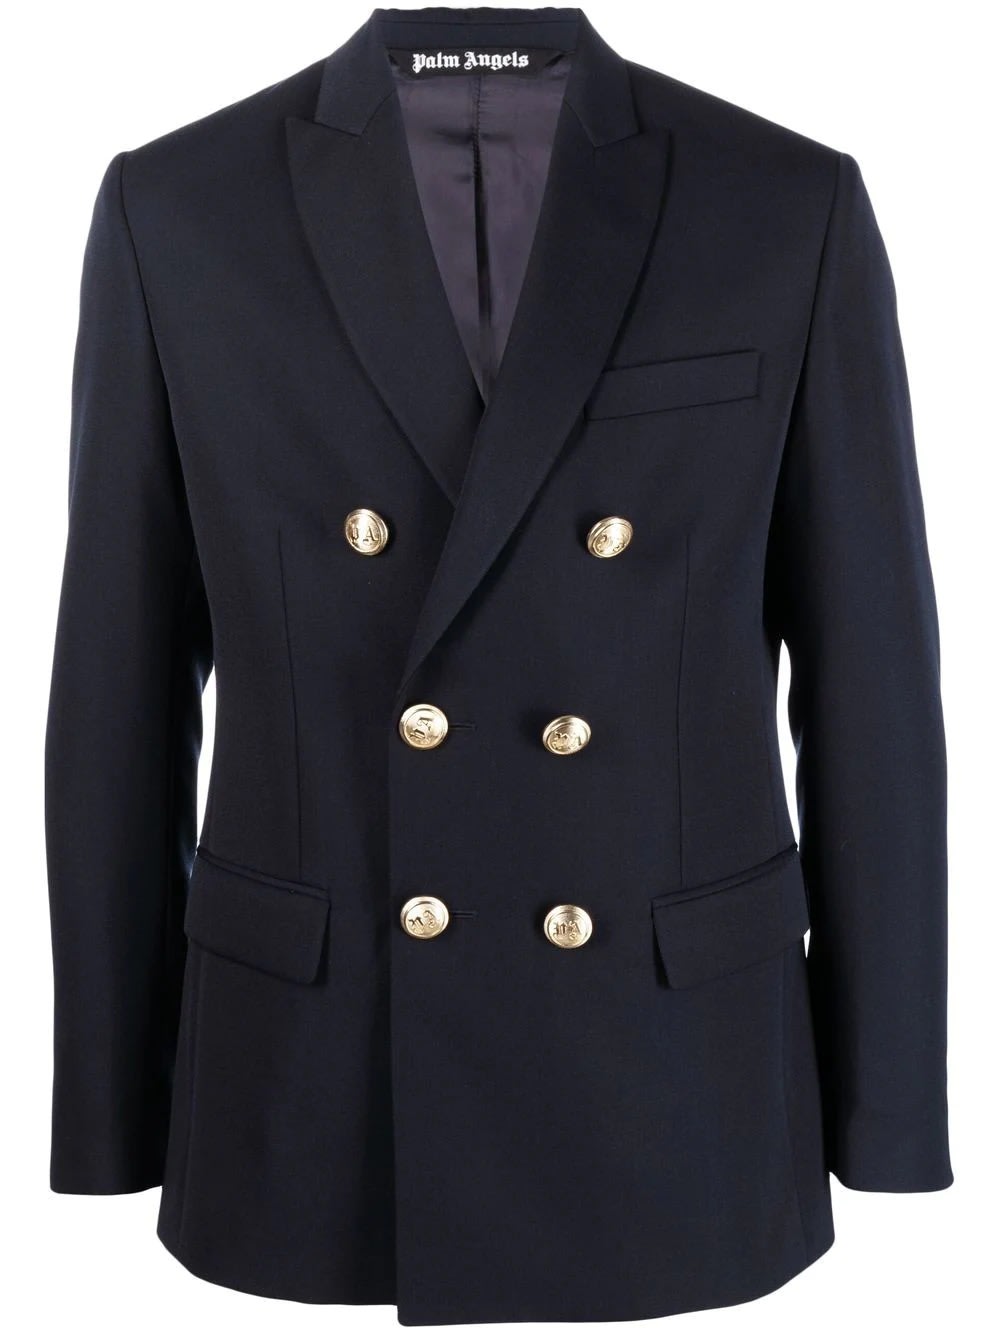 Palm Angels Navy Blue Double Breasted Blazer With Embroidered Palms